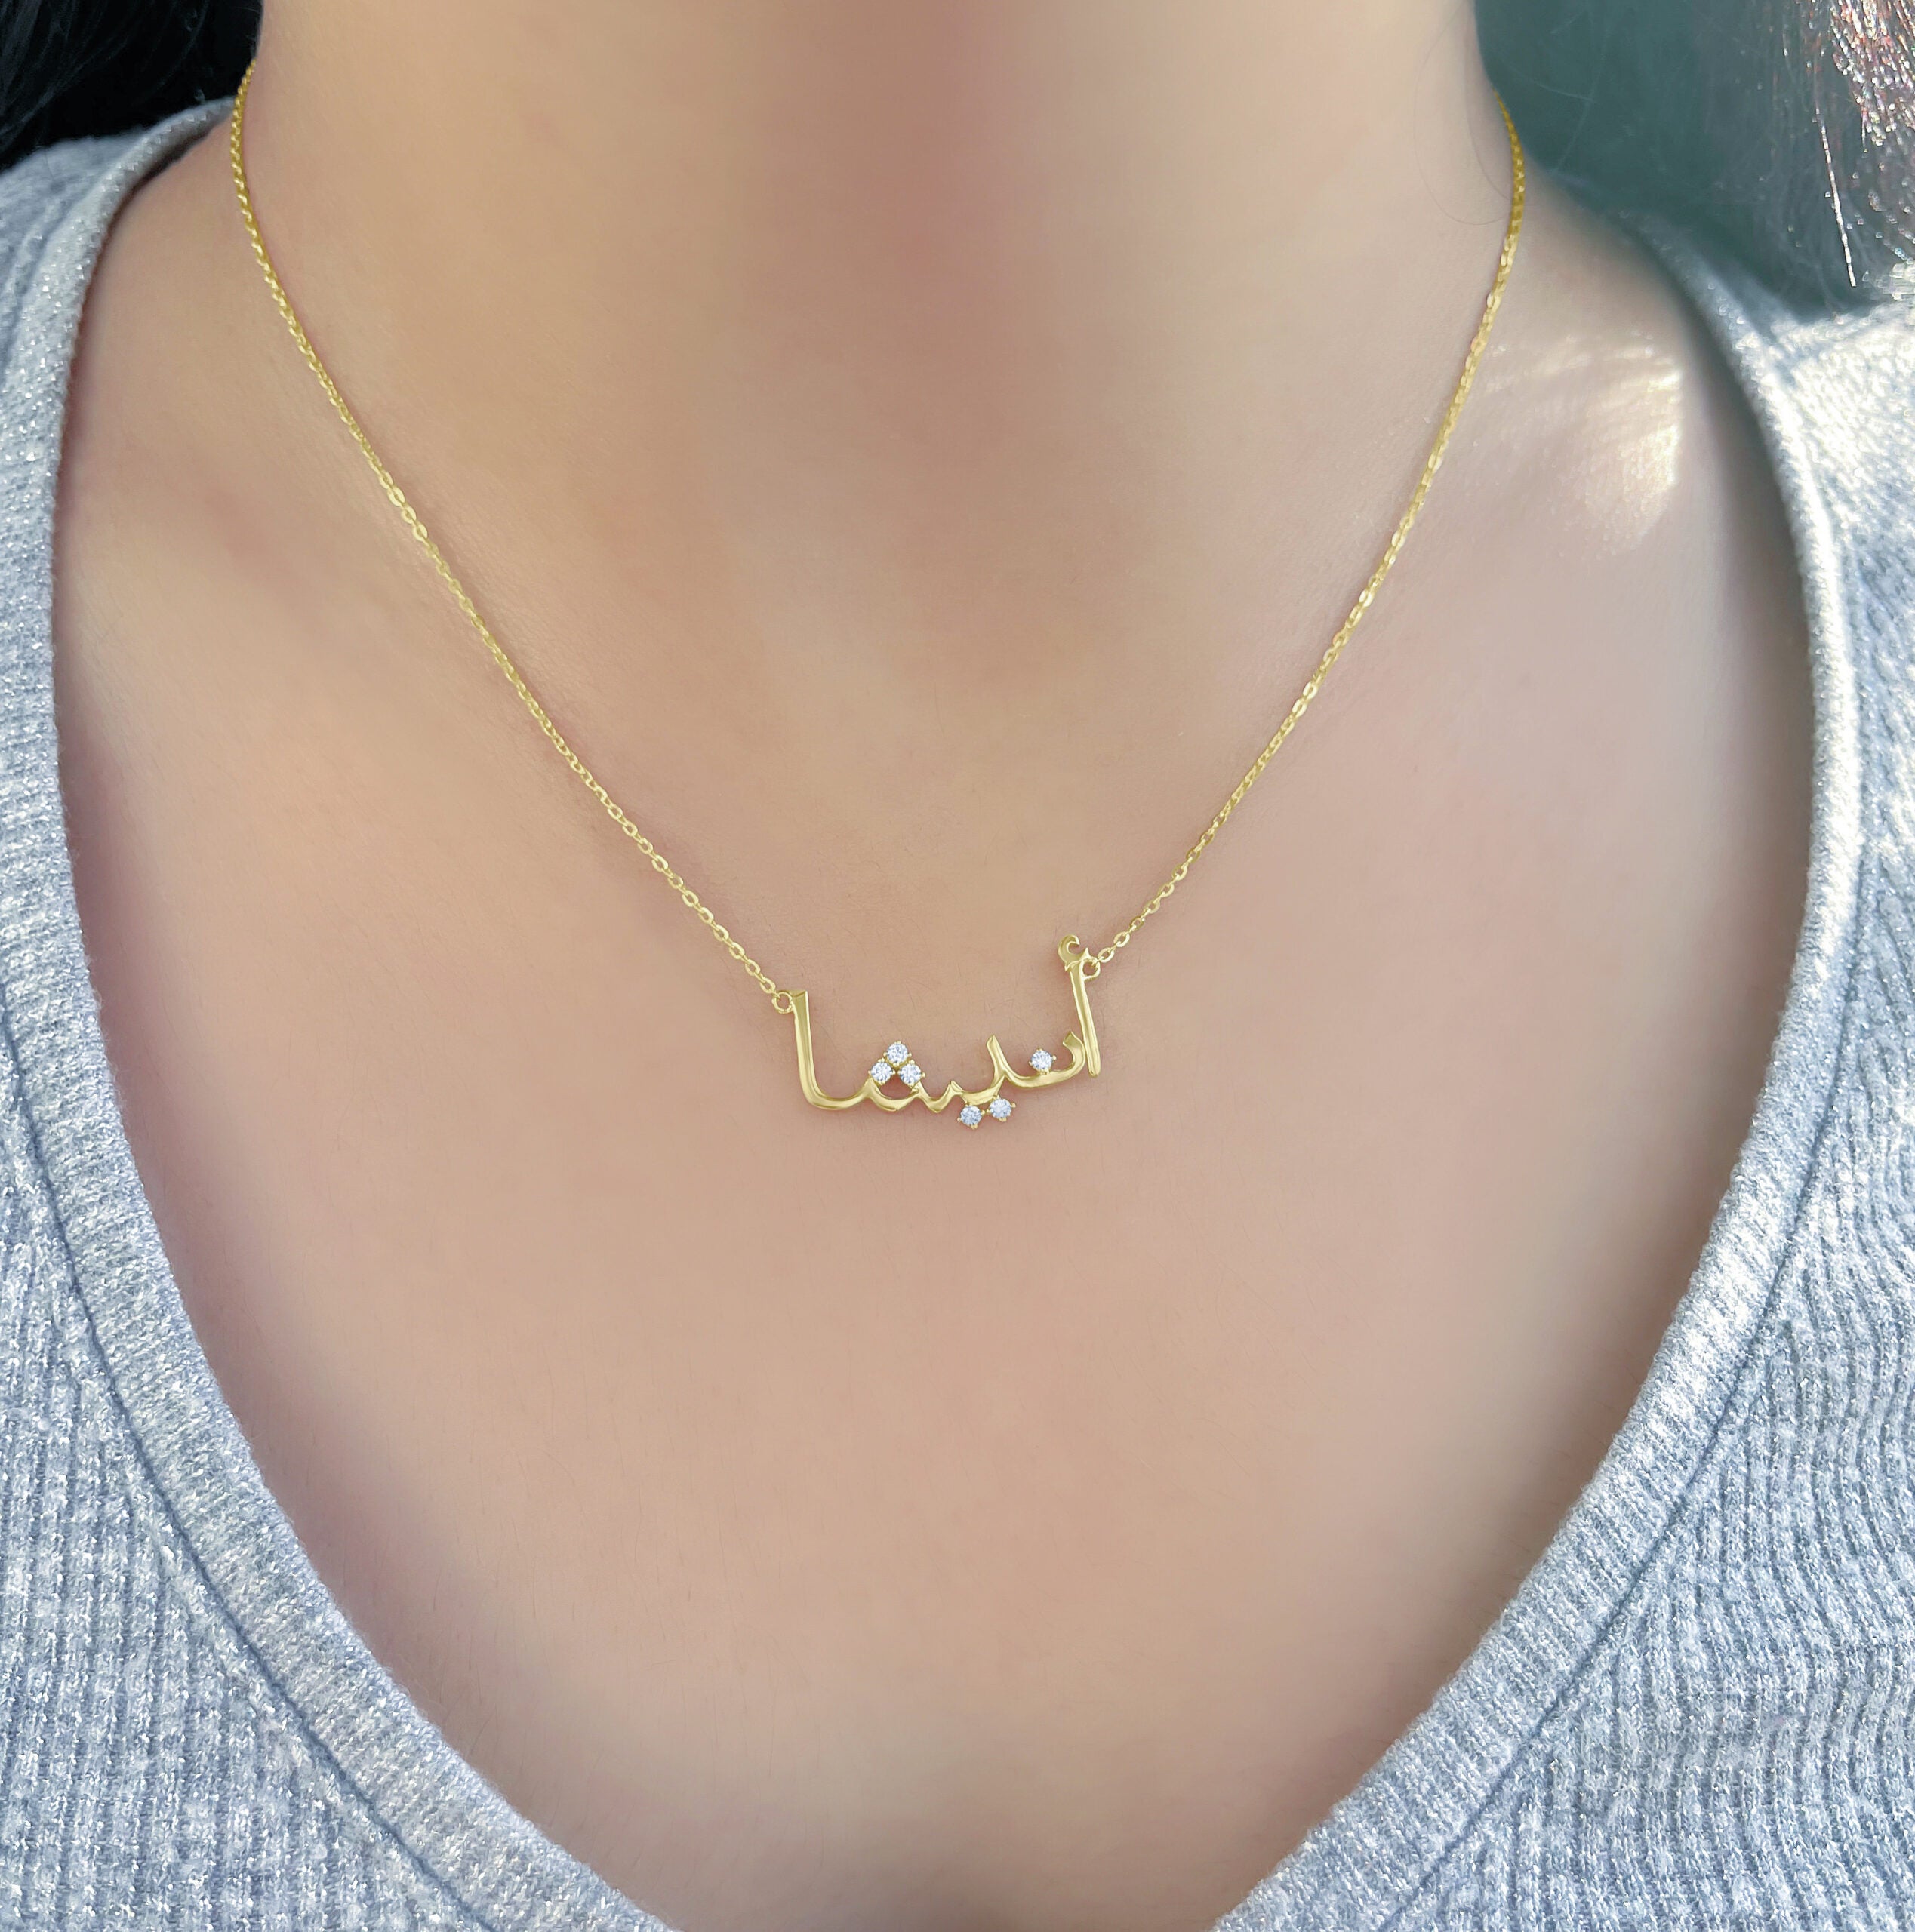 arabic script name necklace with diamonds on the dots